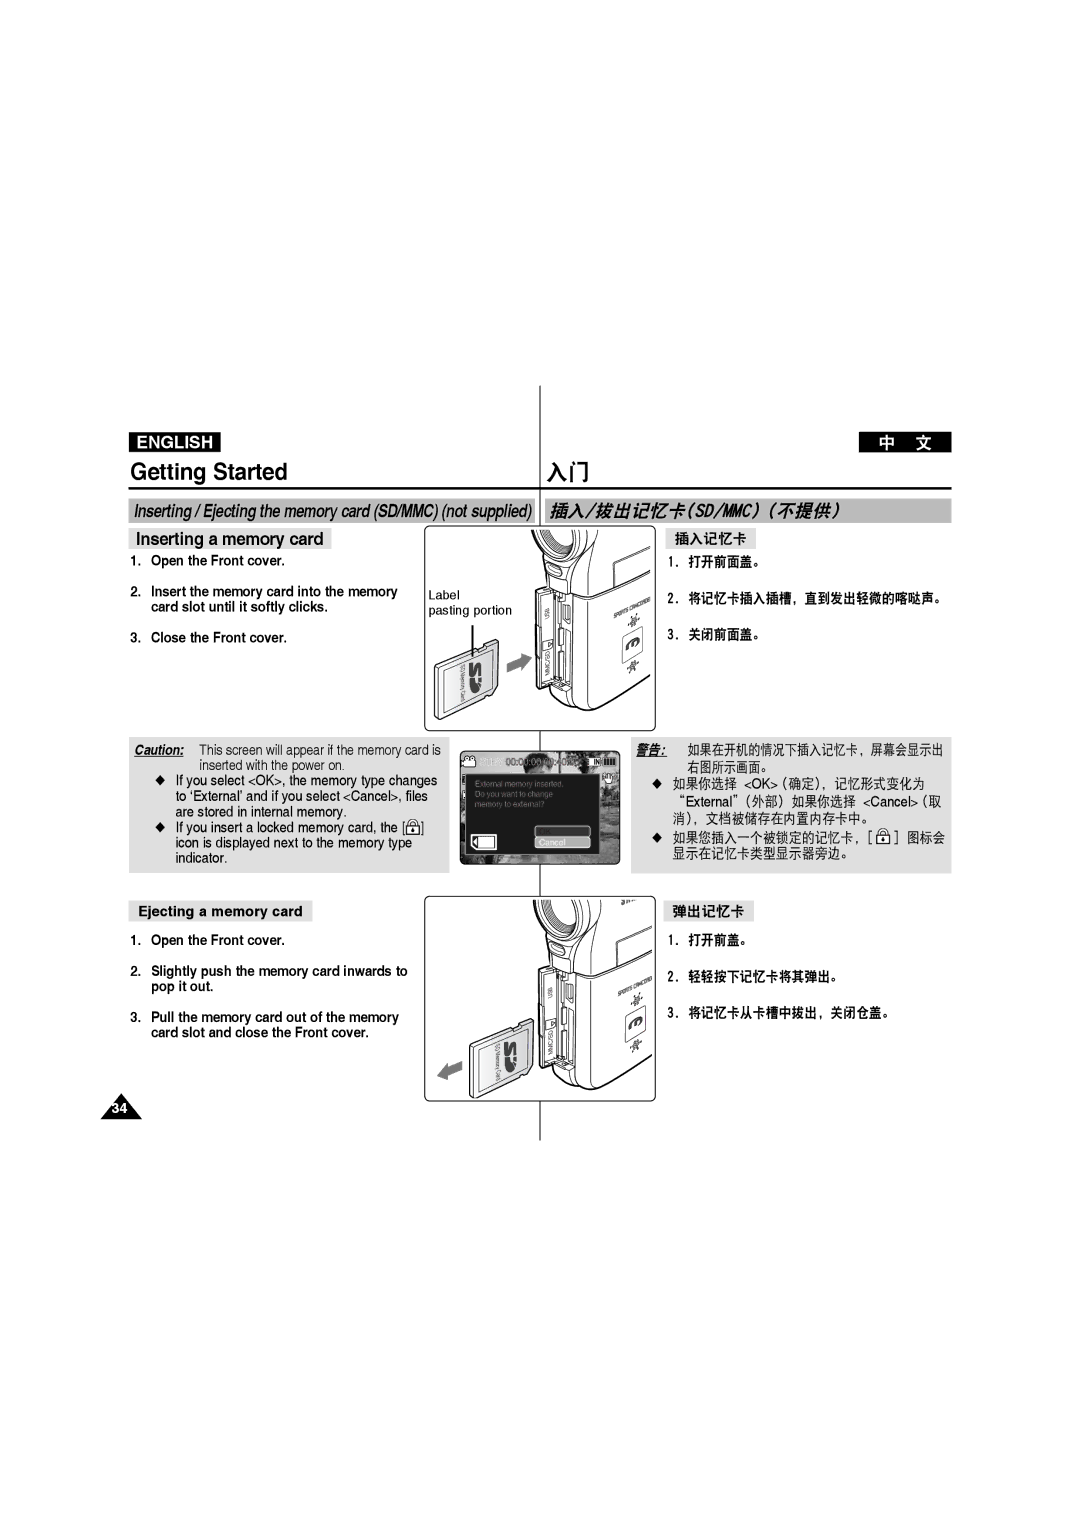 Samsung VP-X220L/XEO, VP-X210L/XEF, VP-X220L/XEF, VP-X210L/XET, VP-X220L/XET manual Open the Front cover, Close the Front cover 